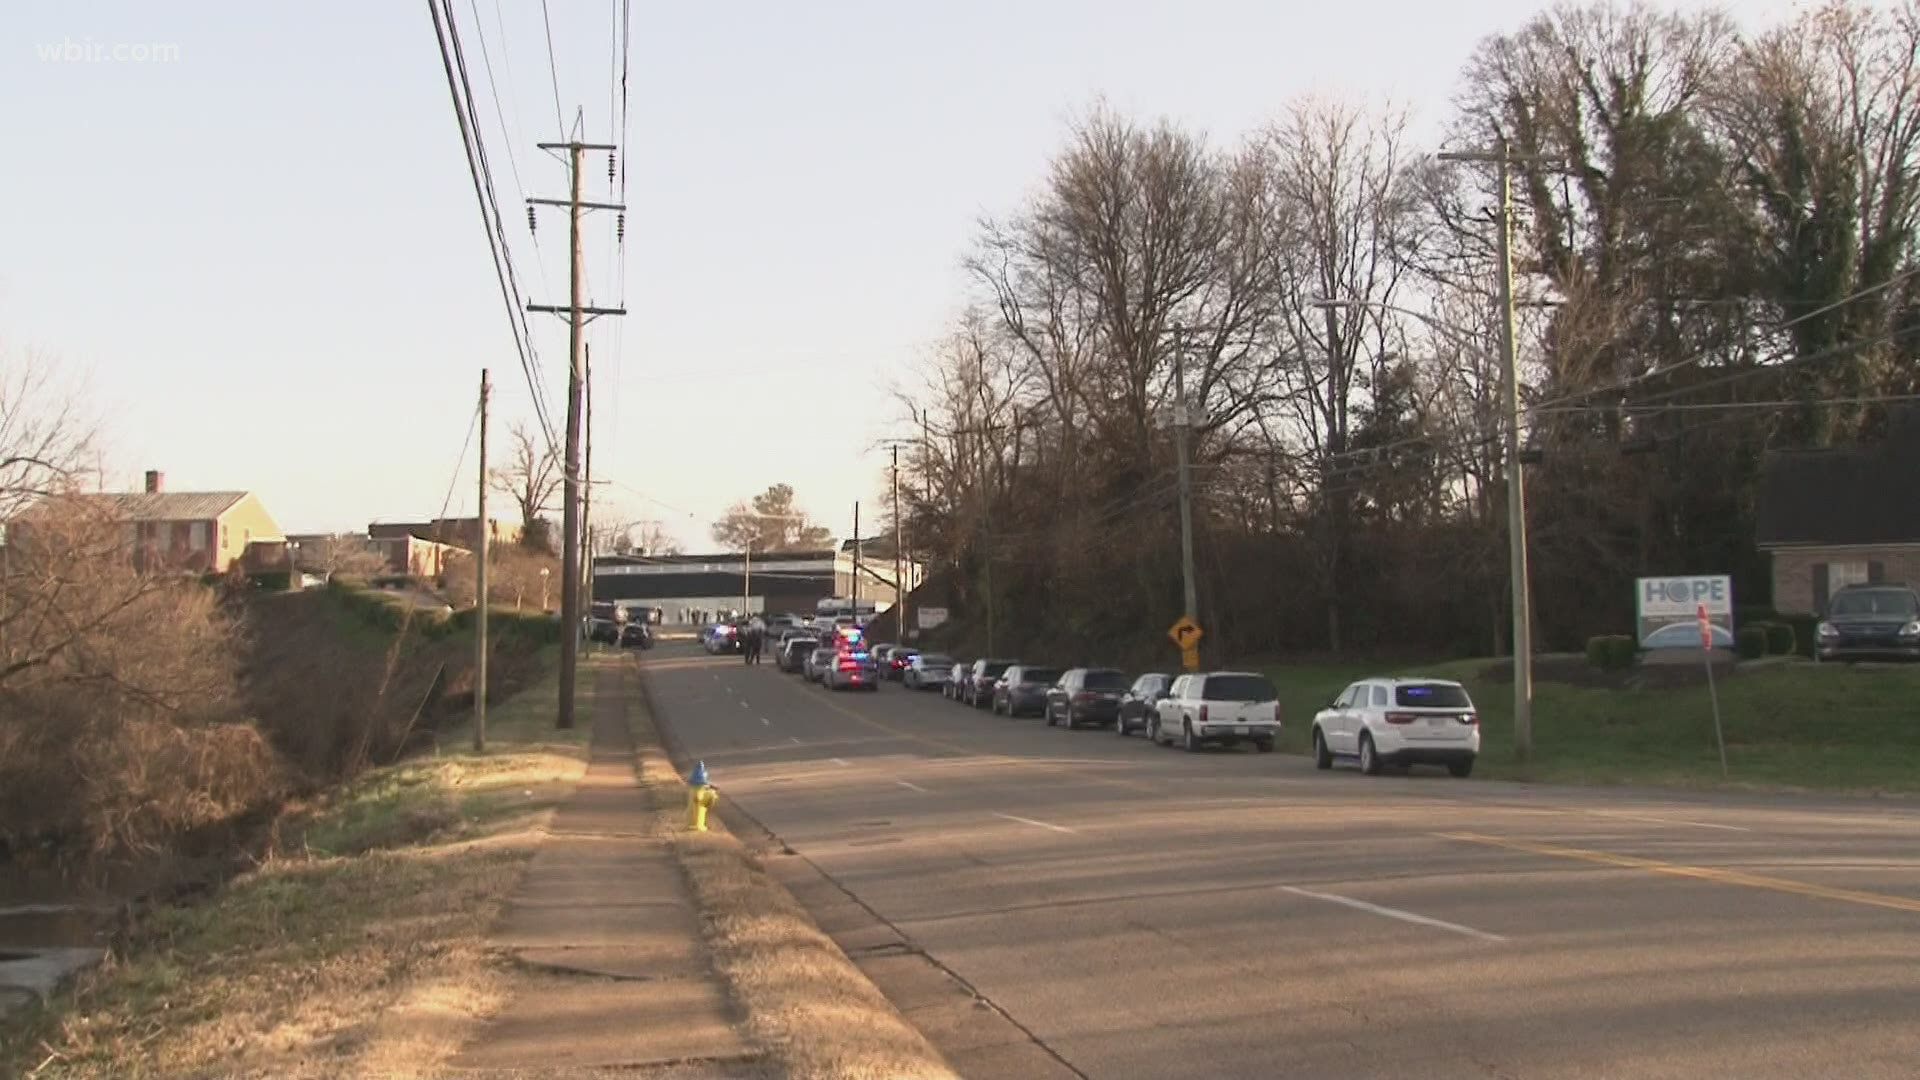 The U.S. Marshals Service asked people to avoid Concord Avenue in West Knoxville, off Sutherland Avenue.